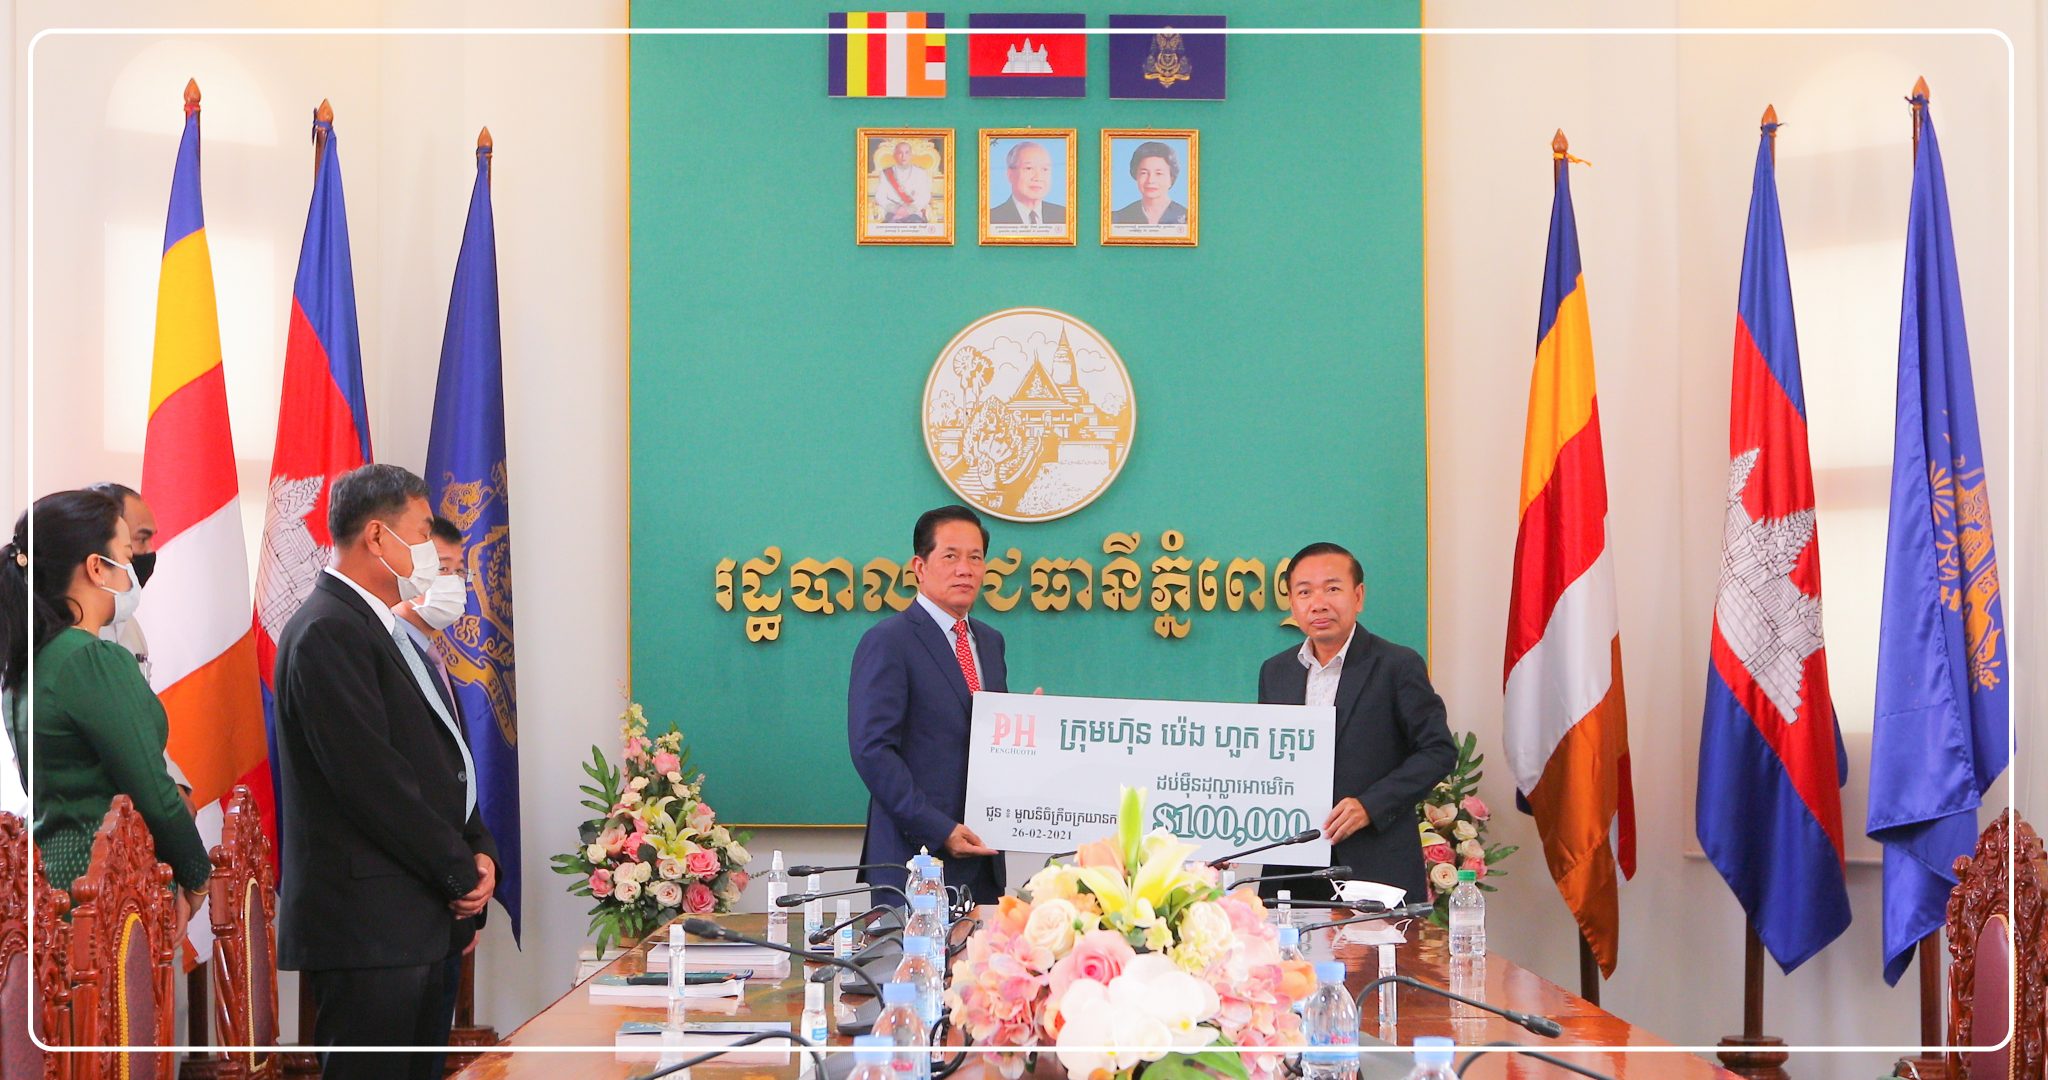 Peng Huoth Group contributes 100,000 USD to the Cambodian Tricycle Foundation Association for 2020 and 2021.